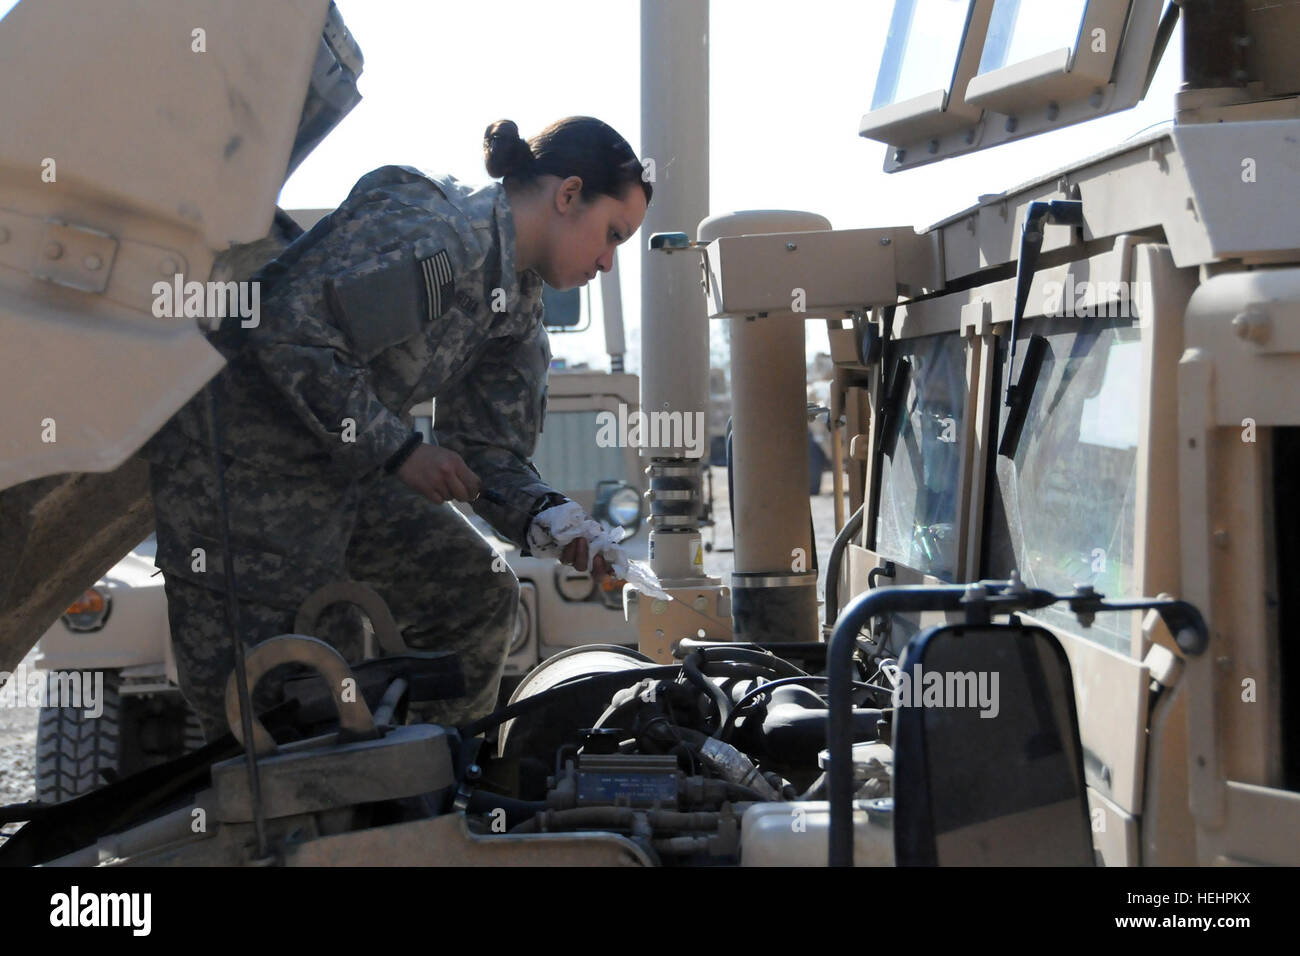 Spc. Soledad Siordia, a driver with Bravo Company, 1-185th Armor (Combined Arms Battalion), 81st Brigade Combat Team, California Army National Guard, conducts maintenance on a vehicle Feb. 5 at Contingency Operating Base Speicher, Iraq.  About 900 California National Guardsmen deployed with the 81st BCT based out of Seattle in support of Operation Iraqi Freedom in August.  They are scheduled to return home this summer. Flickr - The U.S. Army - California National Guardsmen keep vehicles working Stock Photo